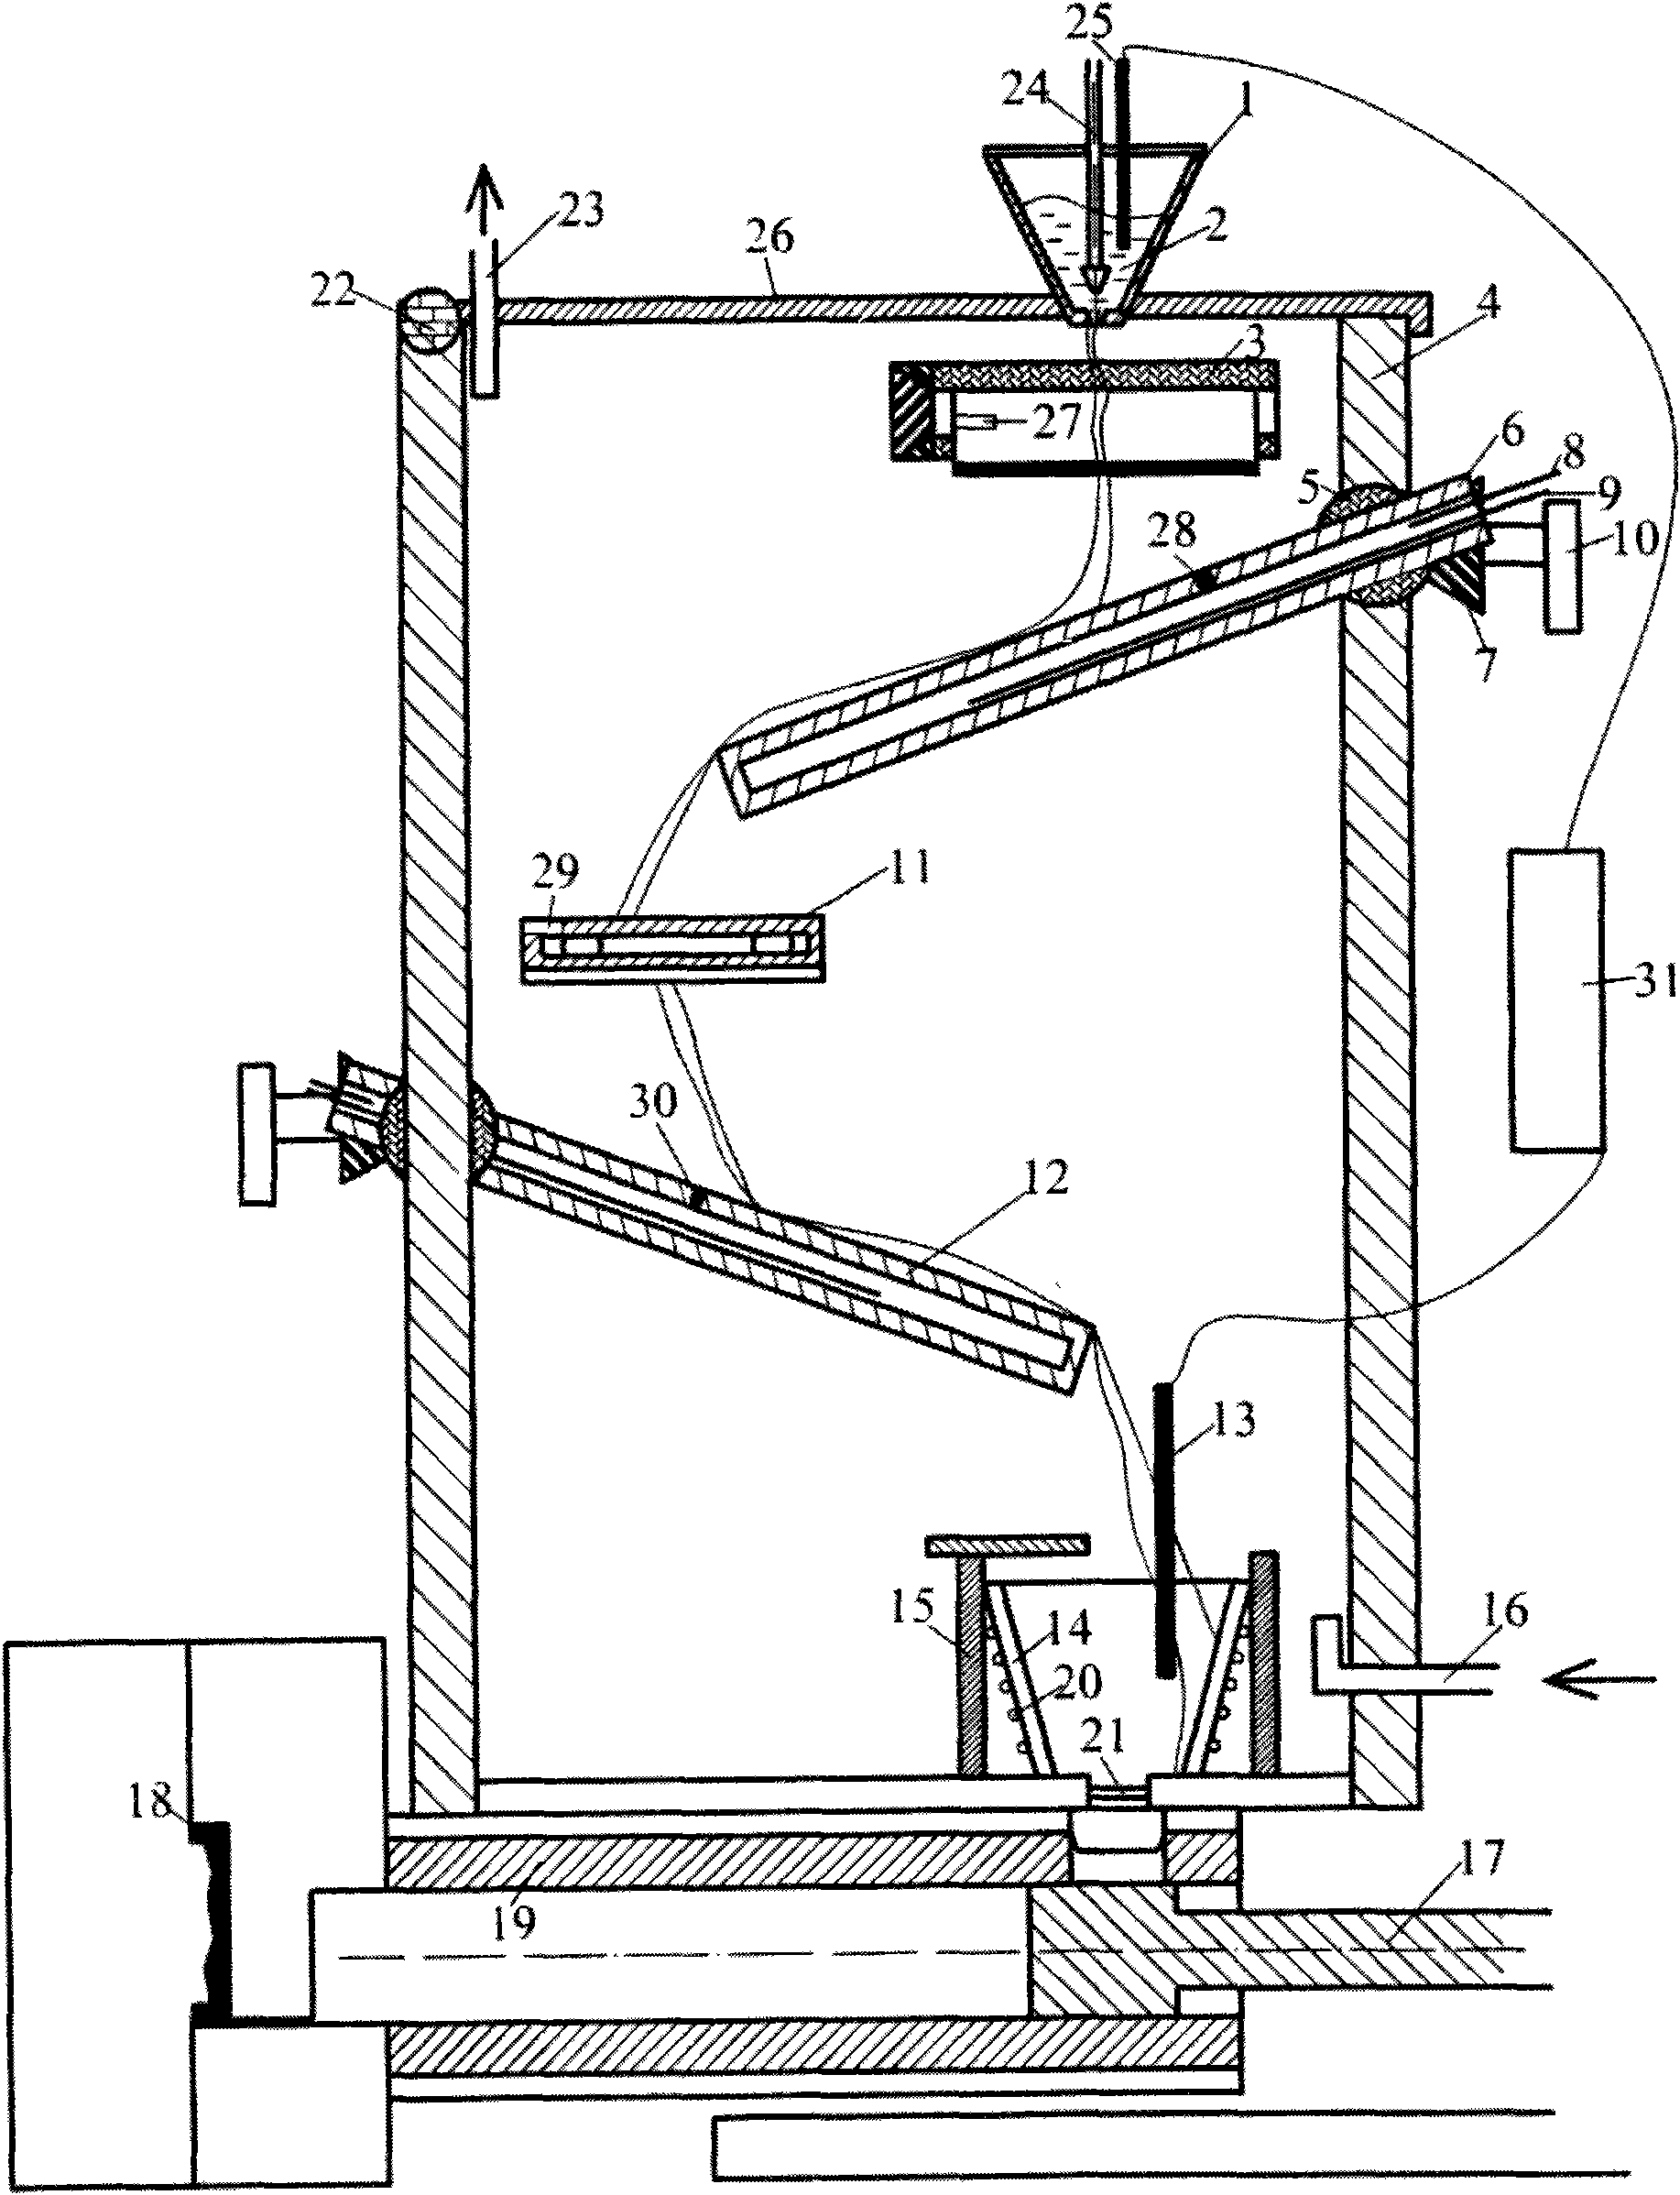 Semi-solid rheological molding device for metal part